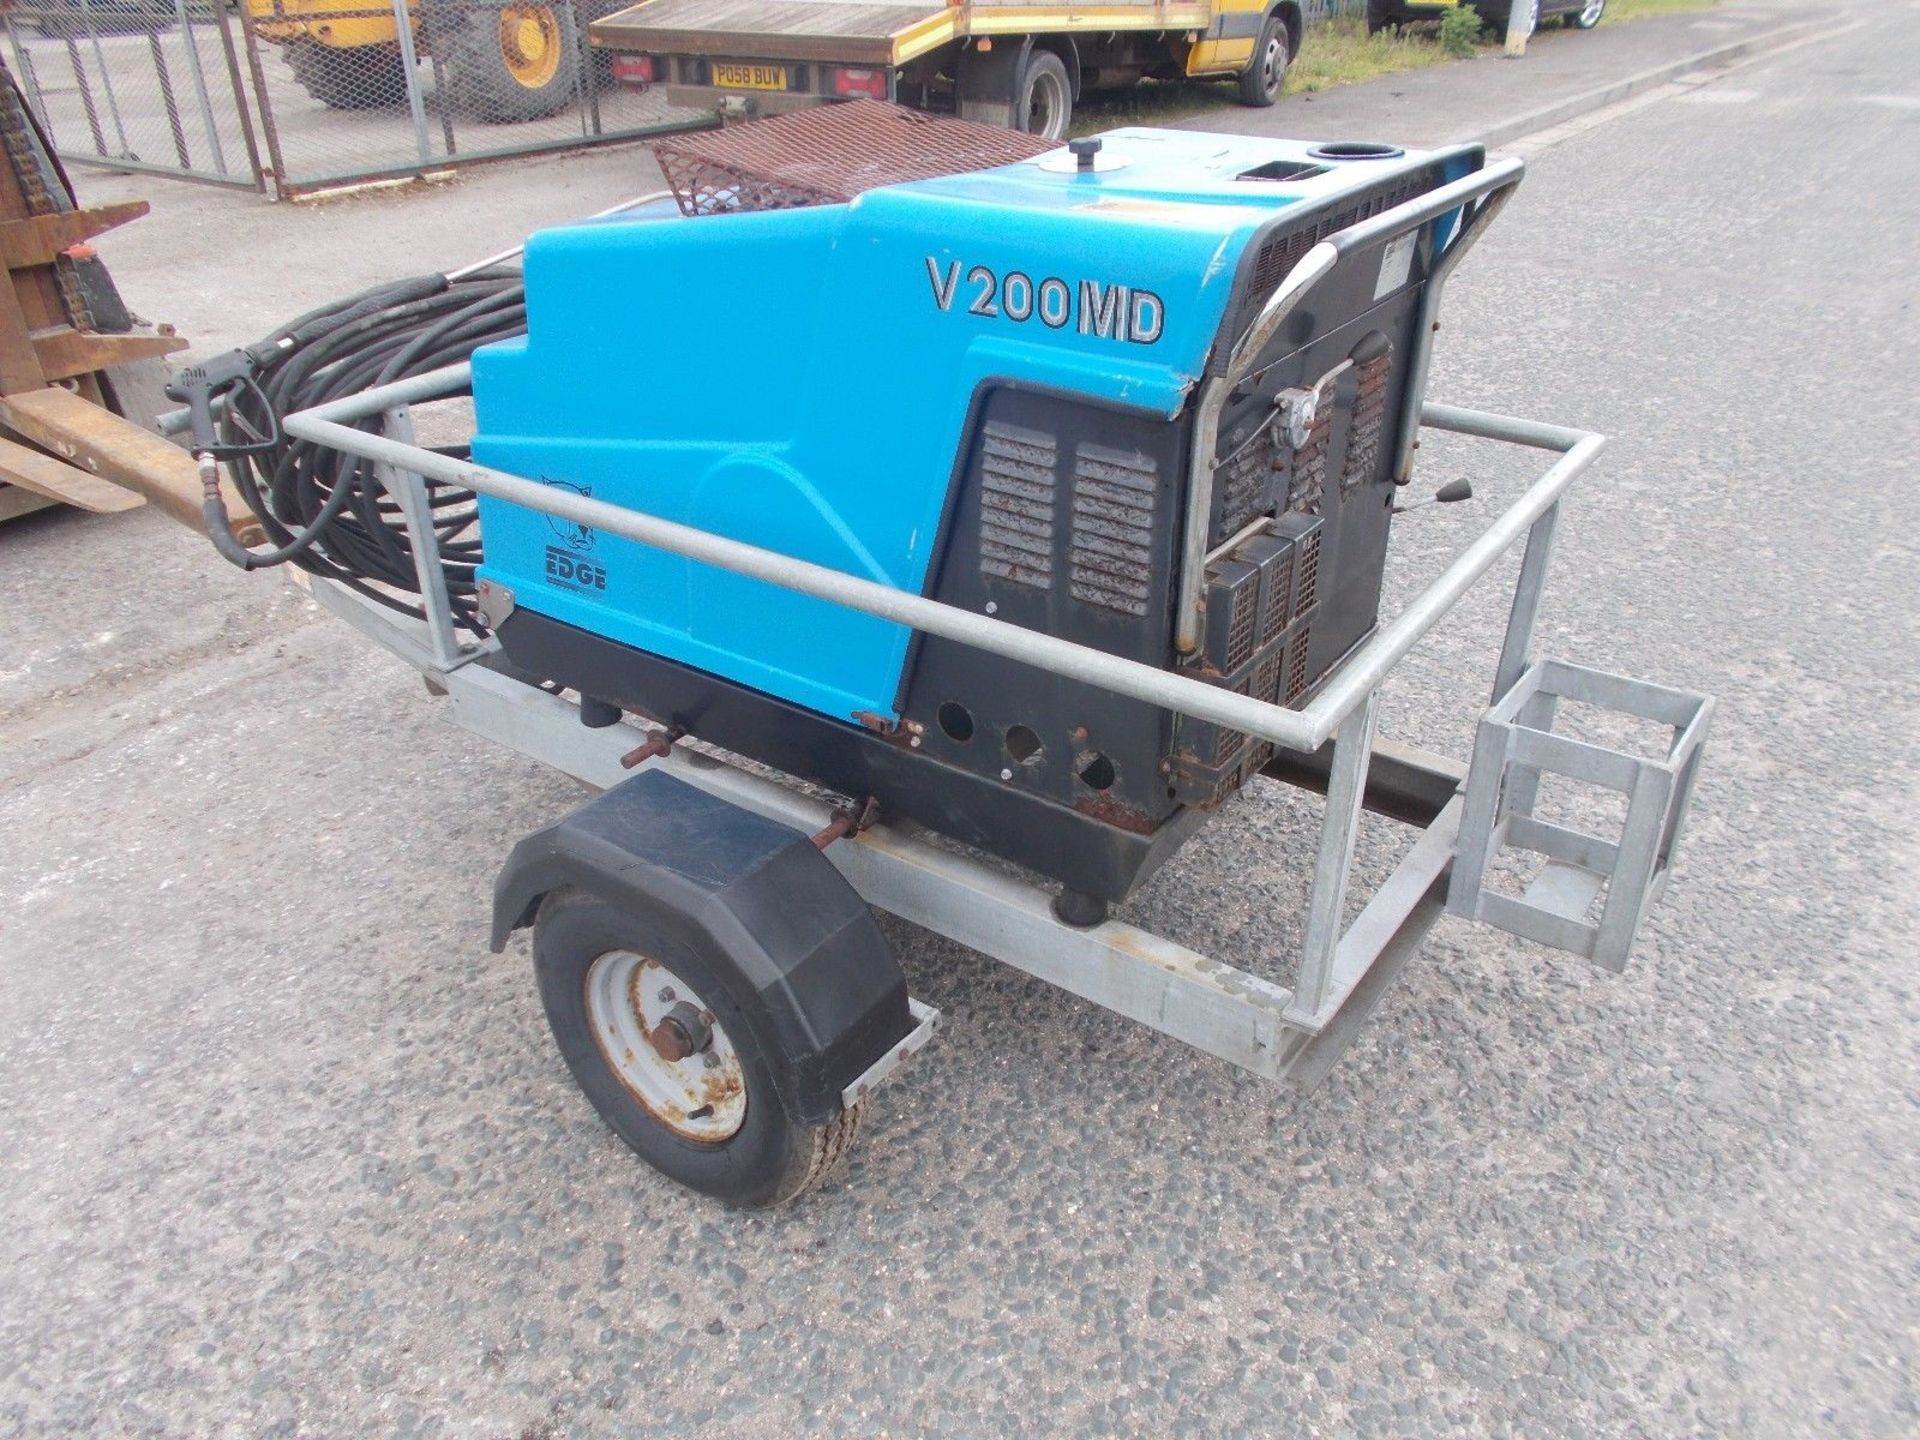 Edge V 200 MD Towable Hot and Cold Diesel Engined Pressure Washer - Image 3 of 7